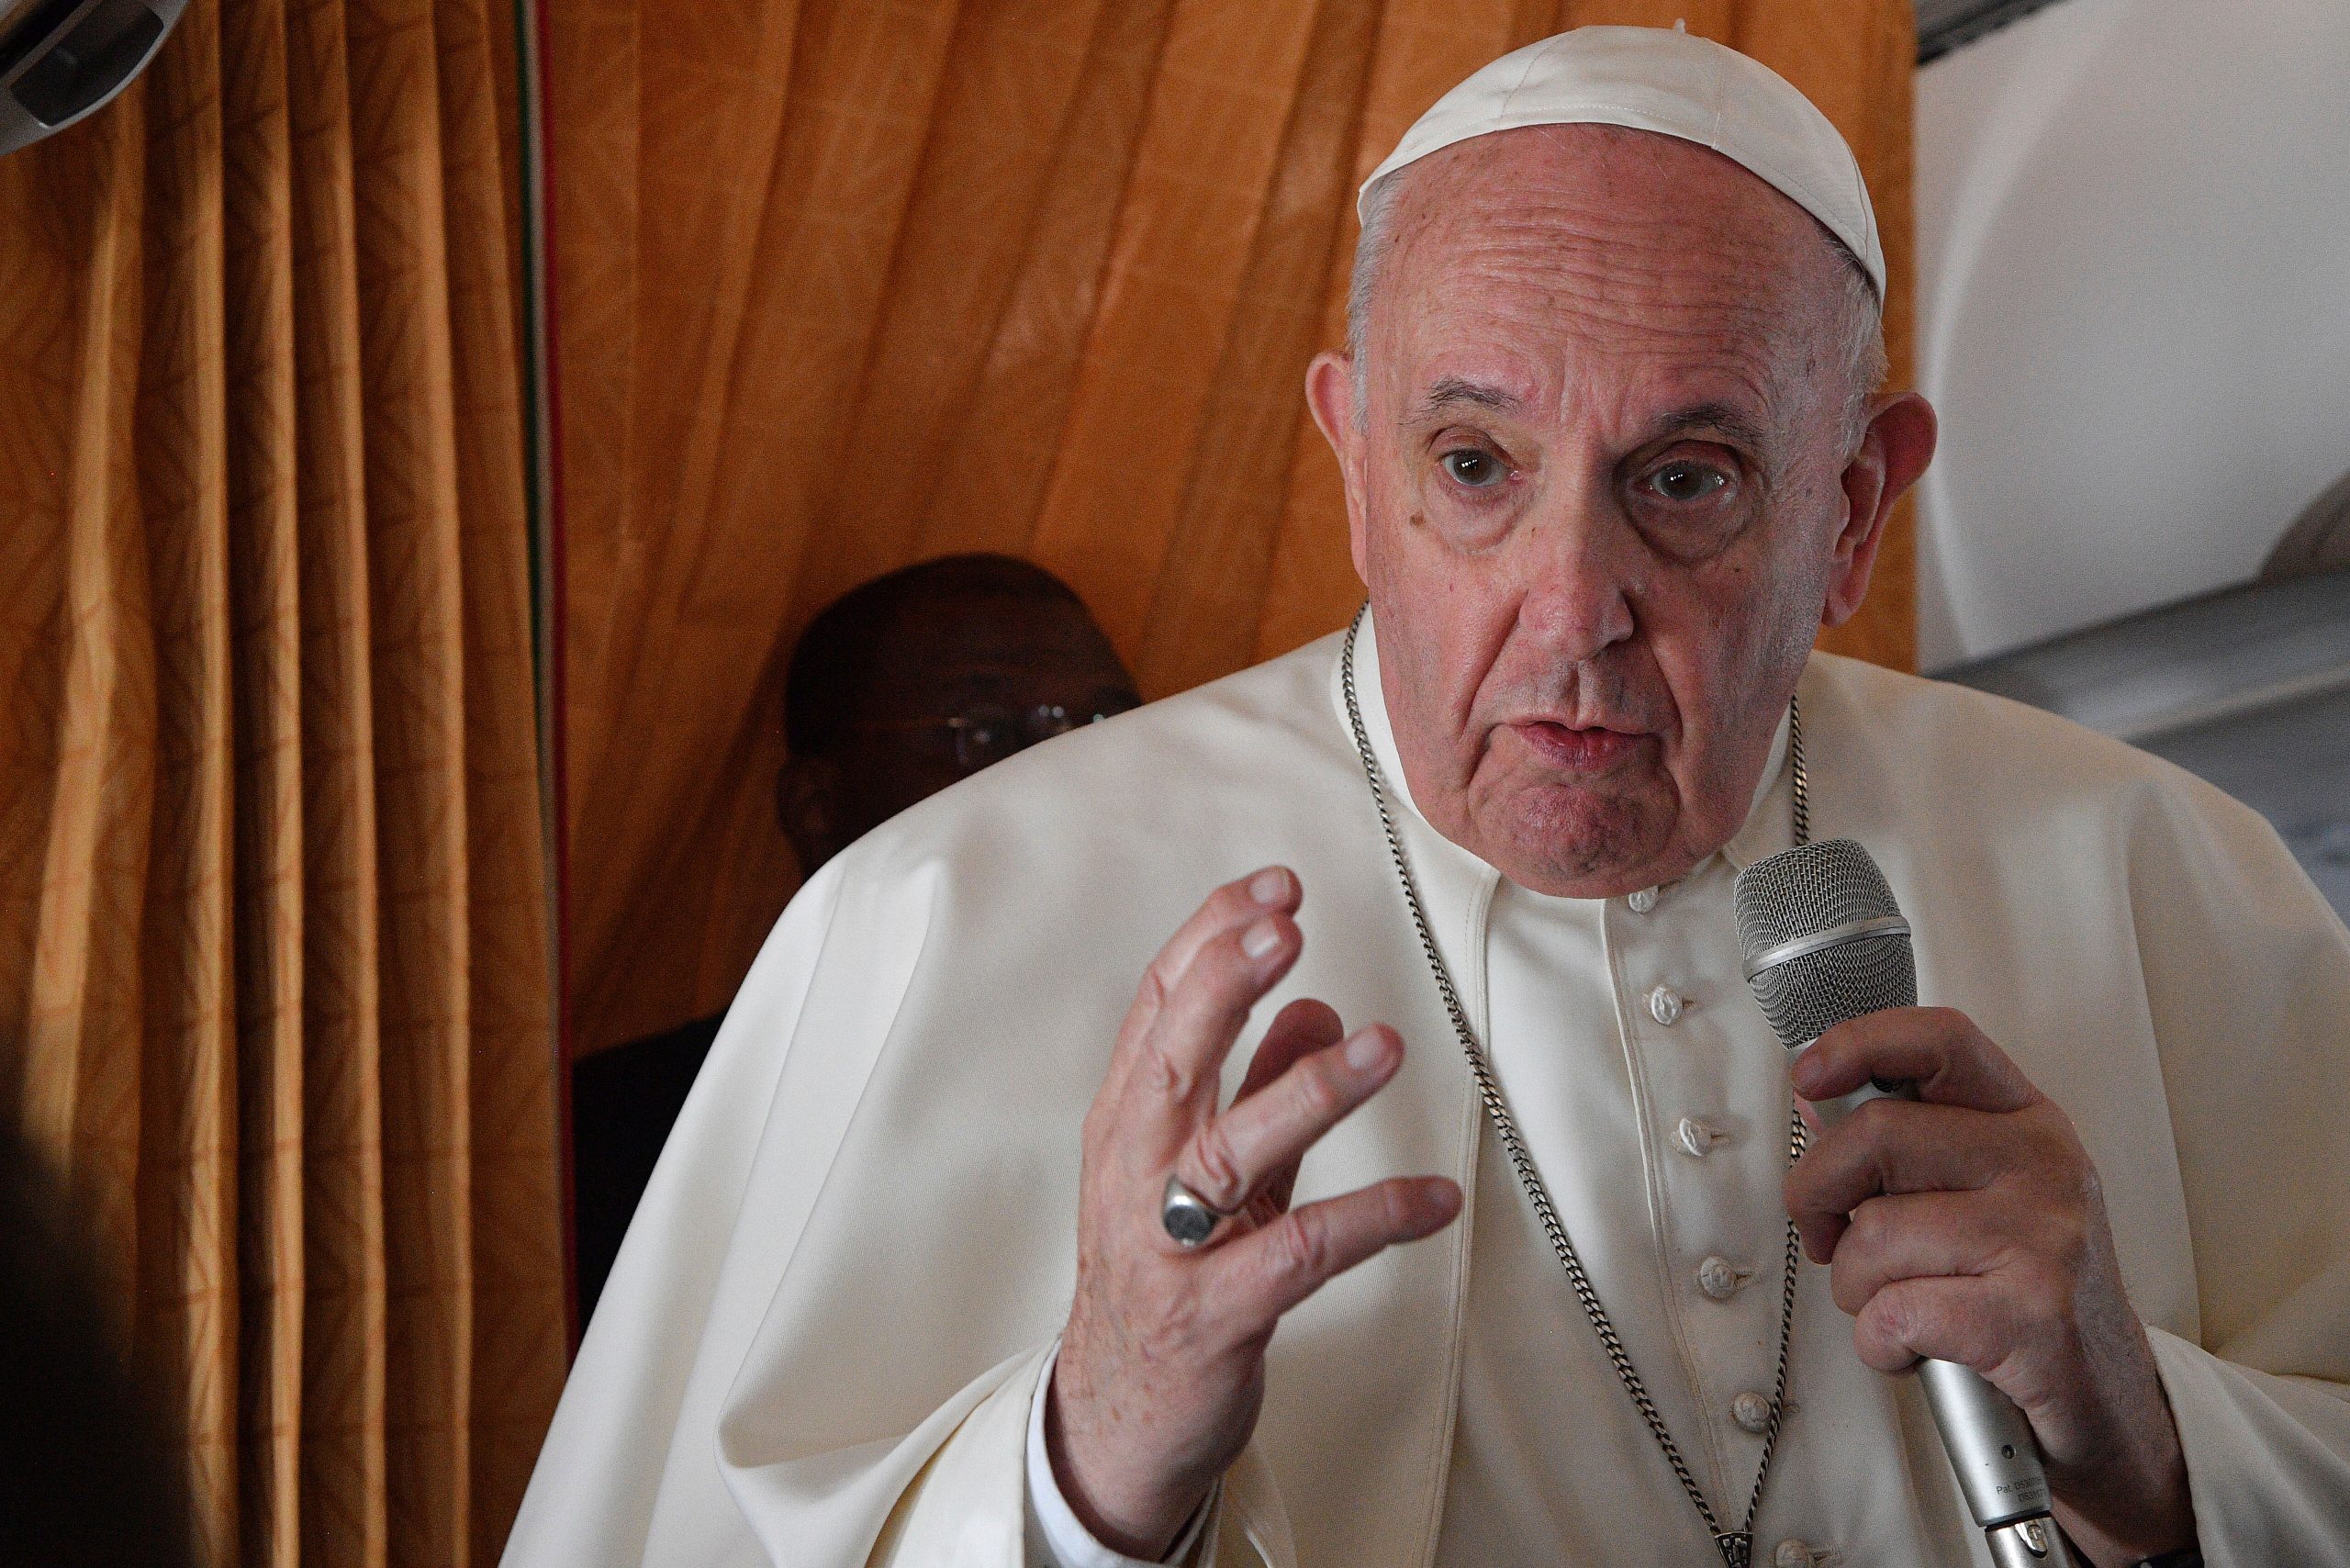 Russia sowing ‘death, destruction, misery’: Pope Francis on Ukraine war